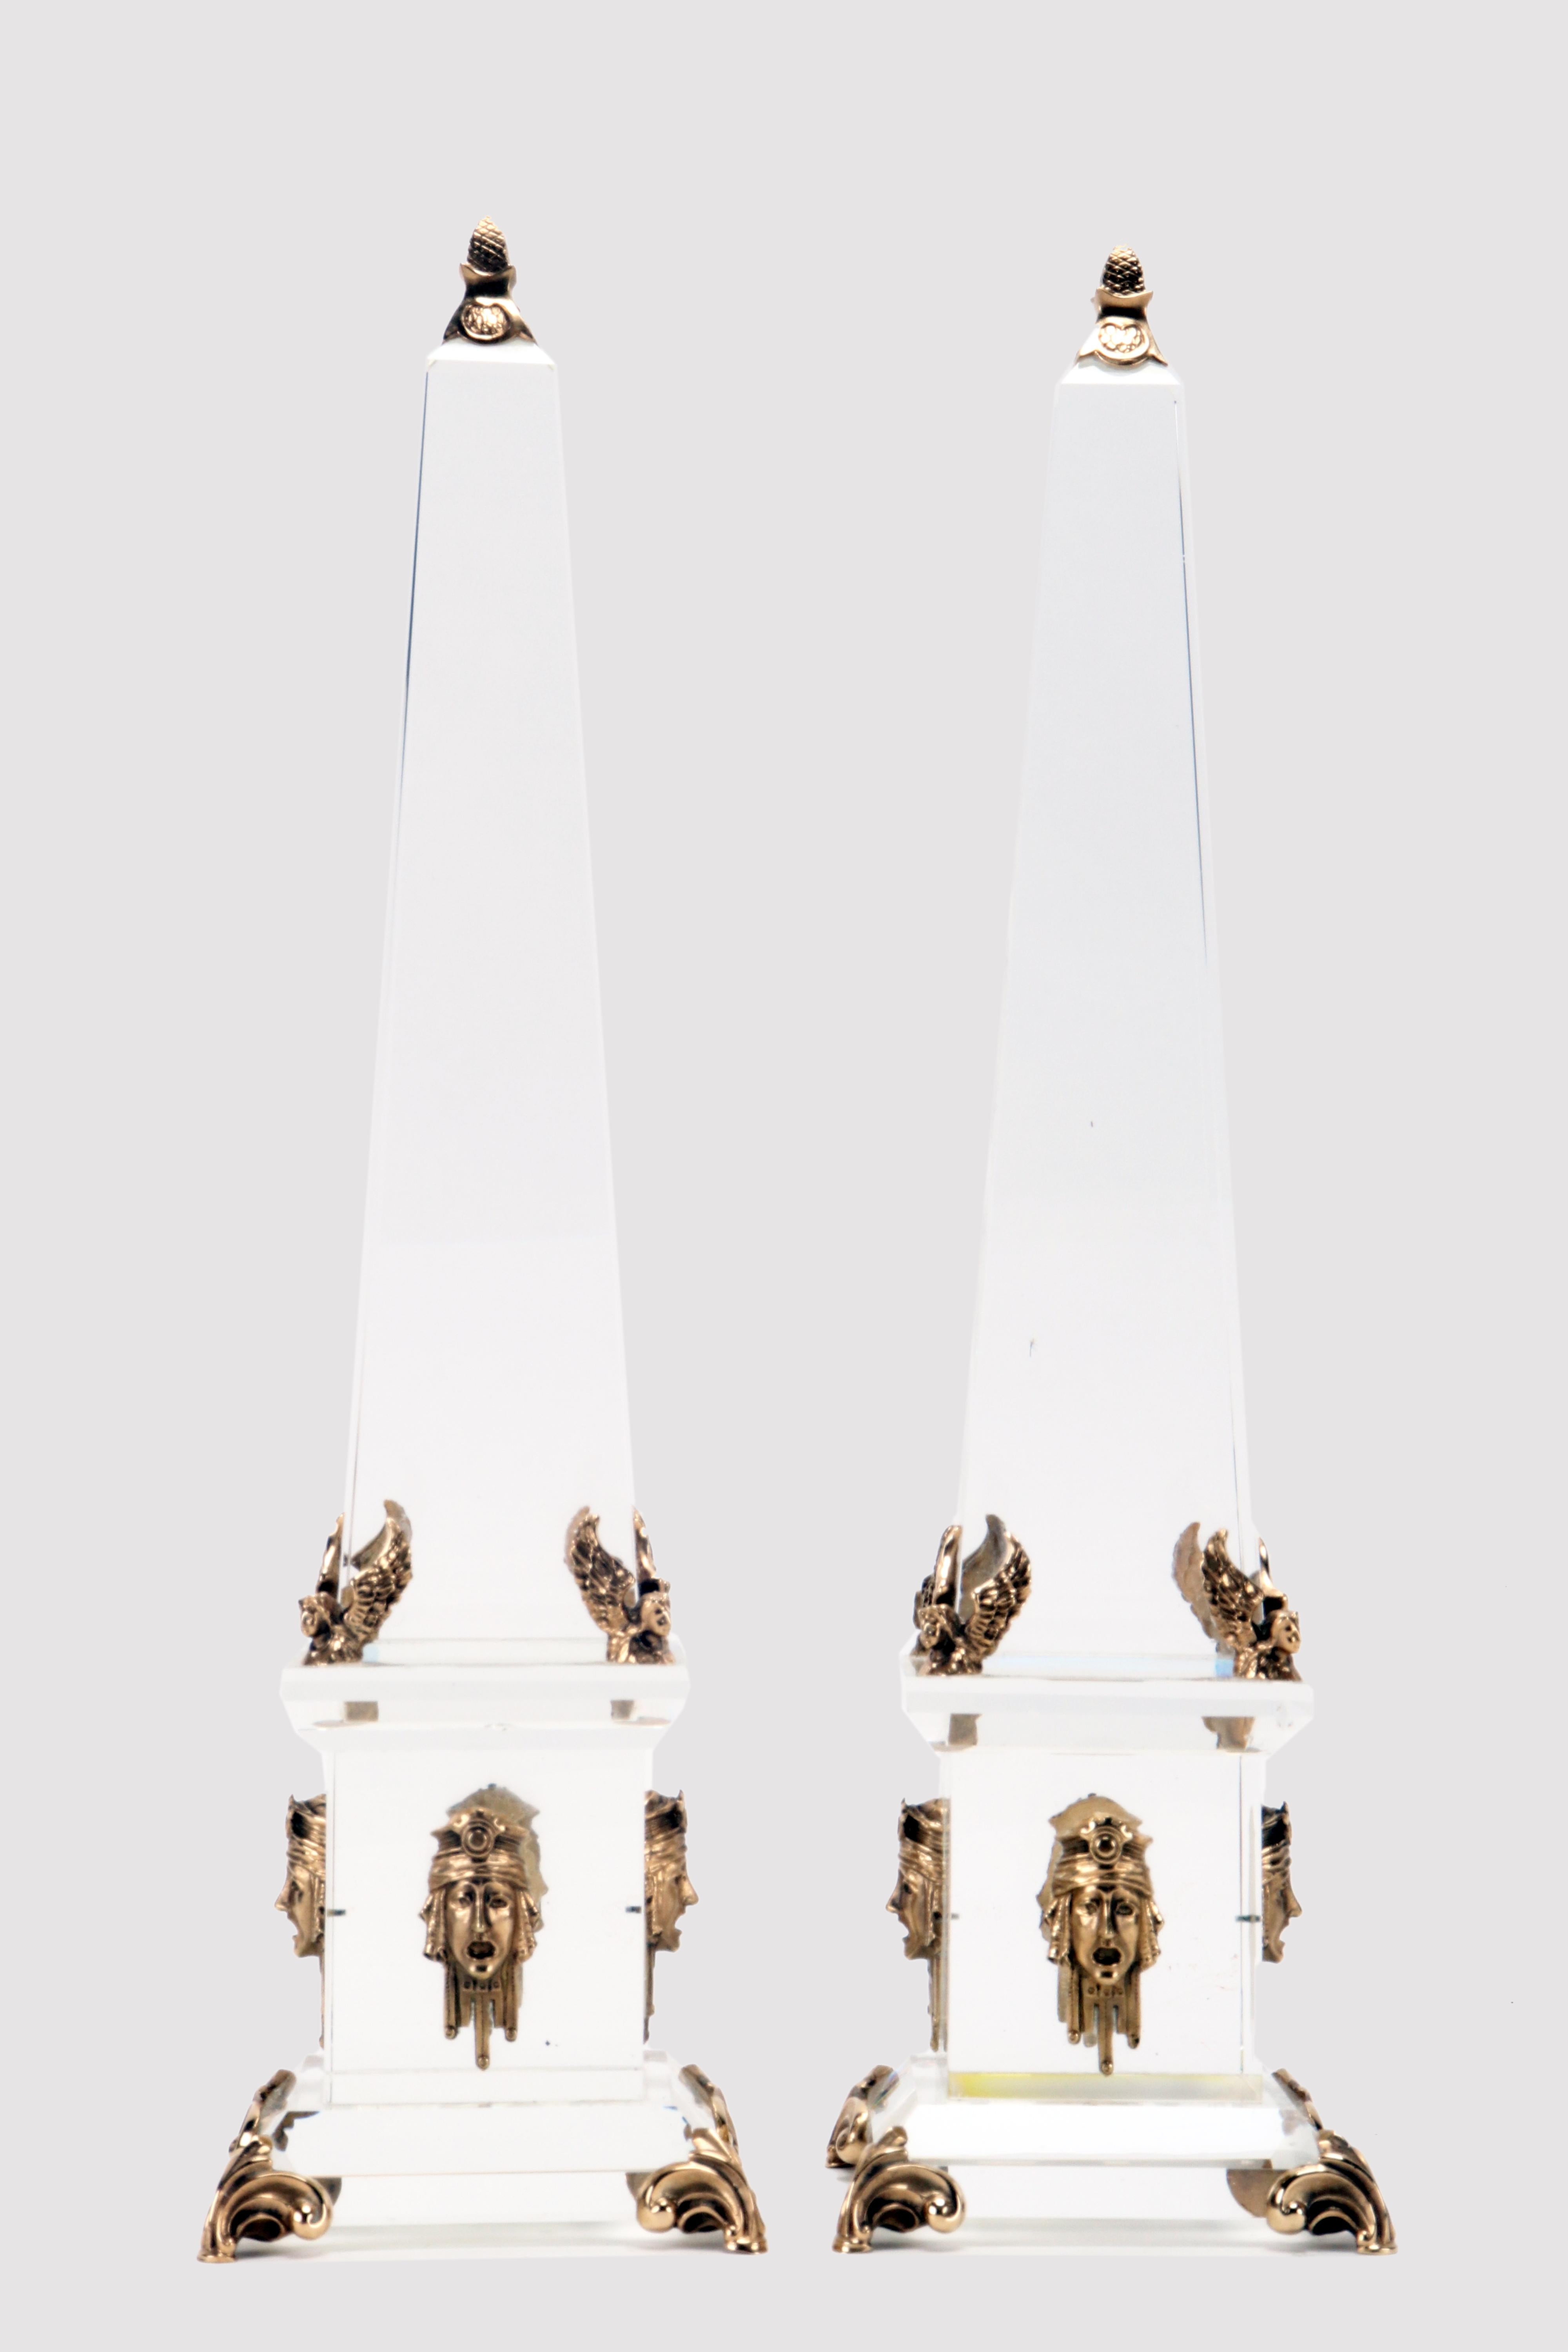 A pair of Grand Tour obelisks. Made of Baccarat crystal. The plinth rests on 4 legs in gilded bronze in the shape of a paw, 4 angel heads, also made of gilded bronze, separate the obelisk from the base. At the center of the sides of the plinth,